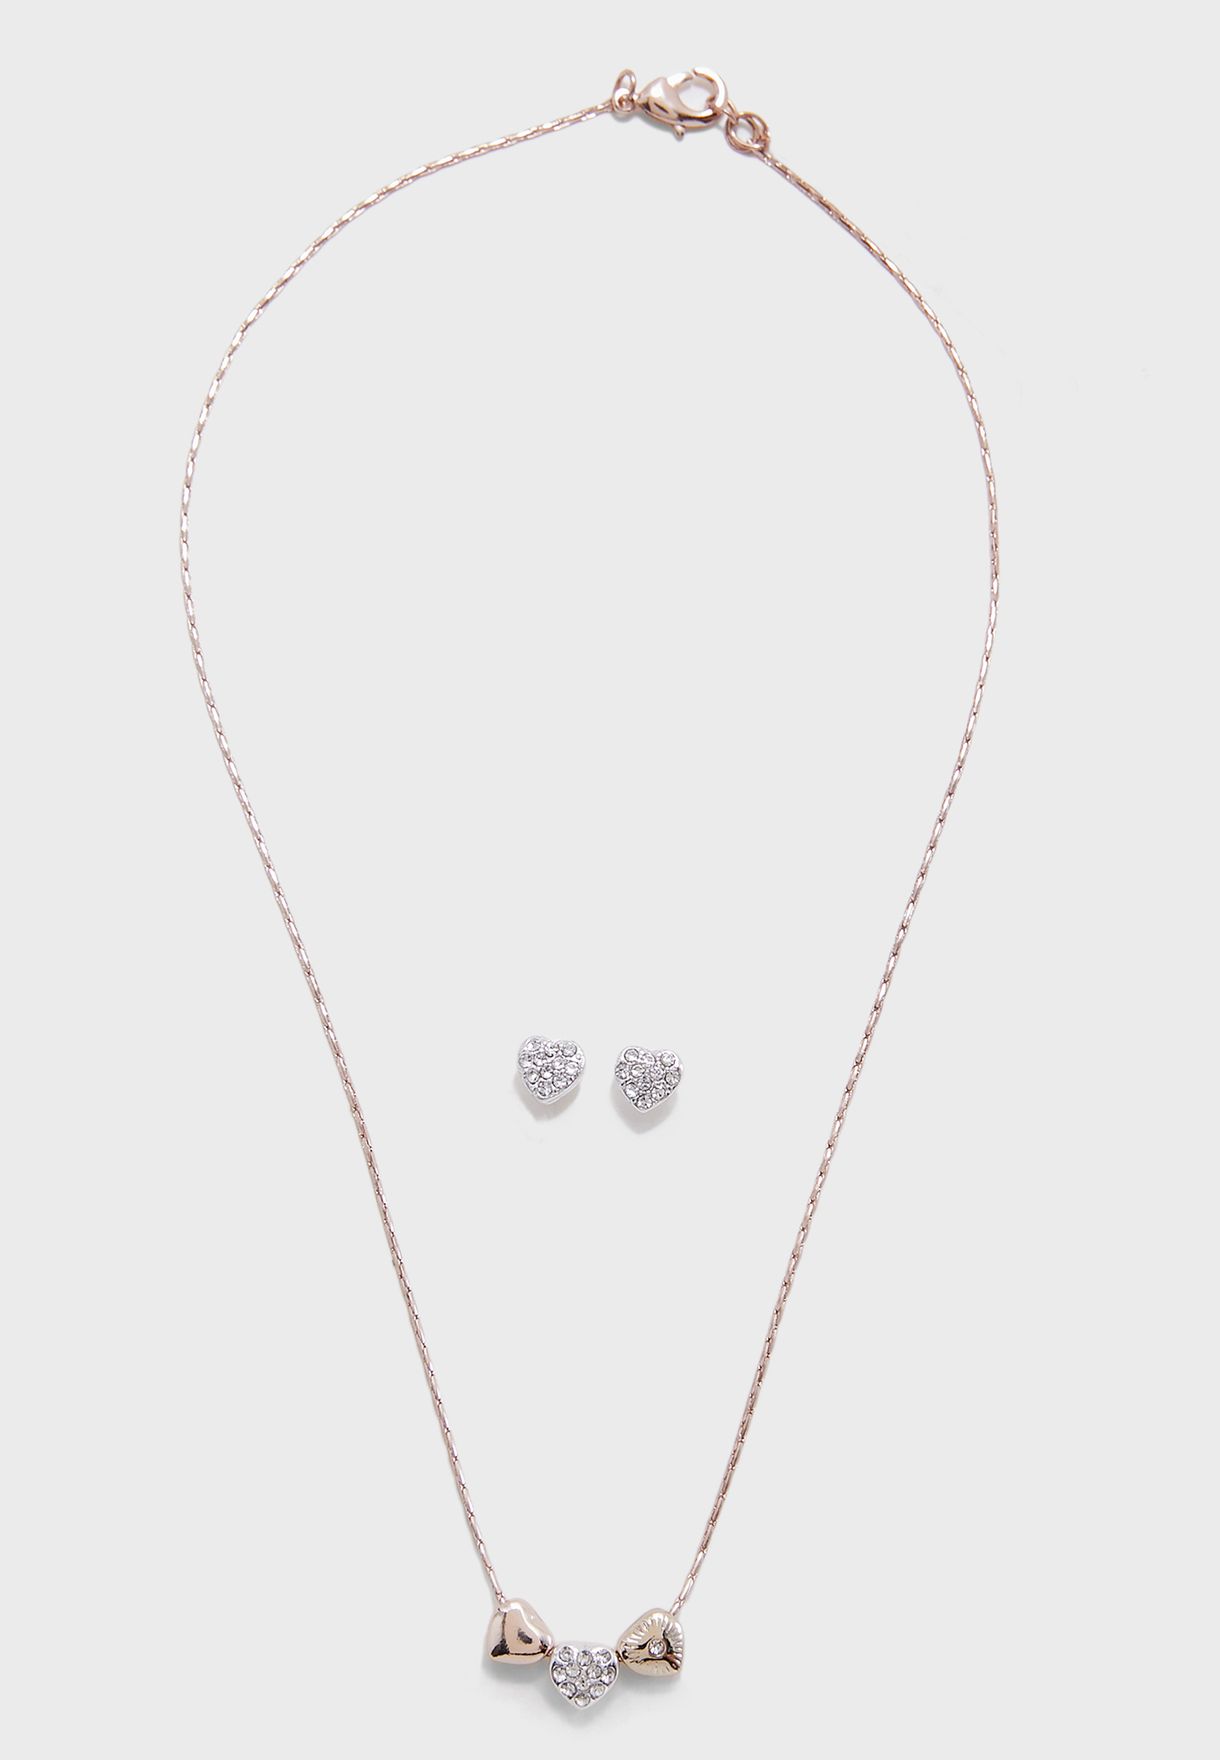 With Love Necklace+Earrings Set